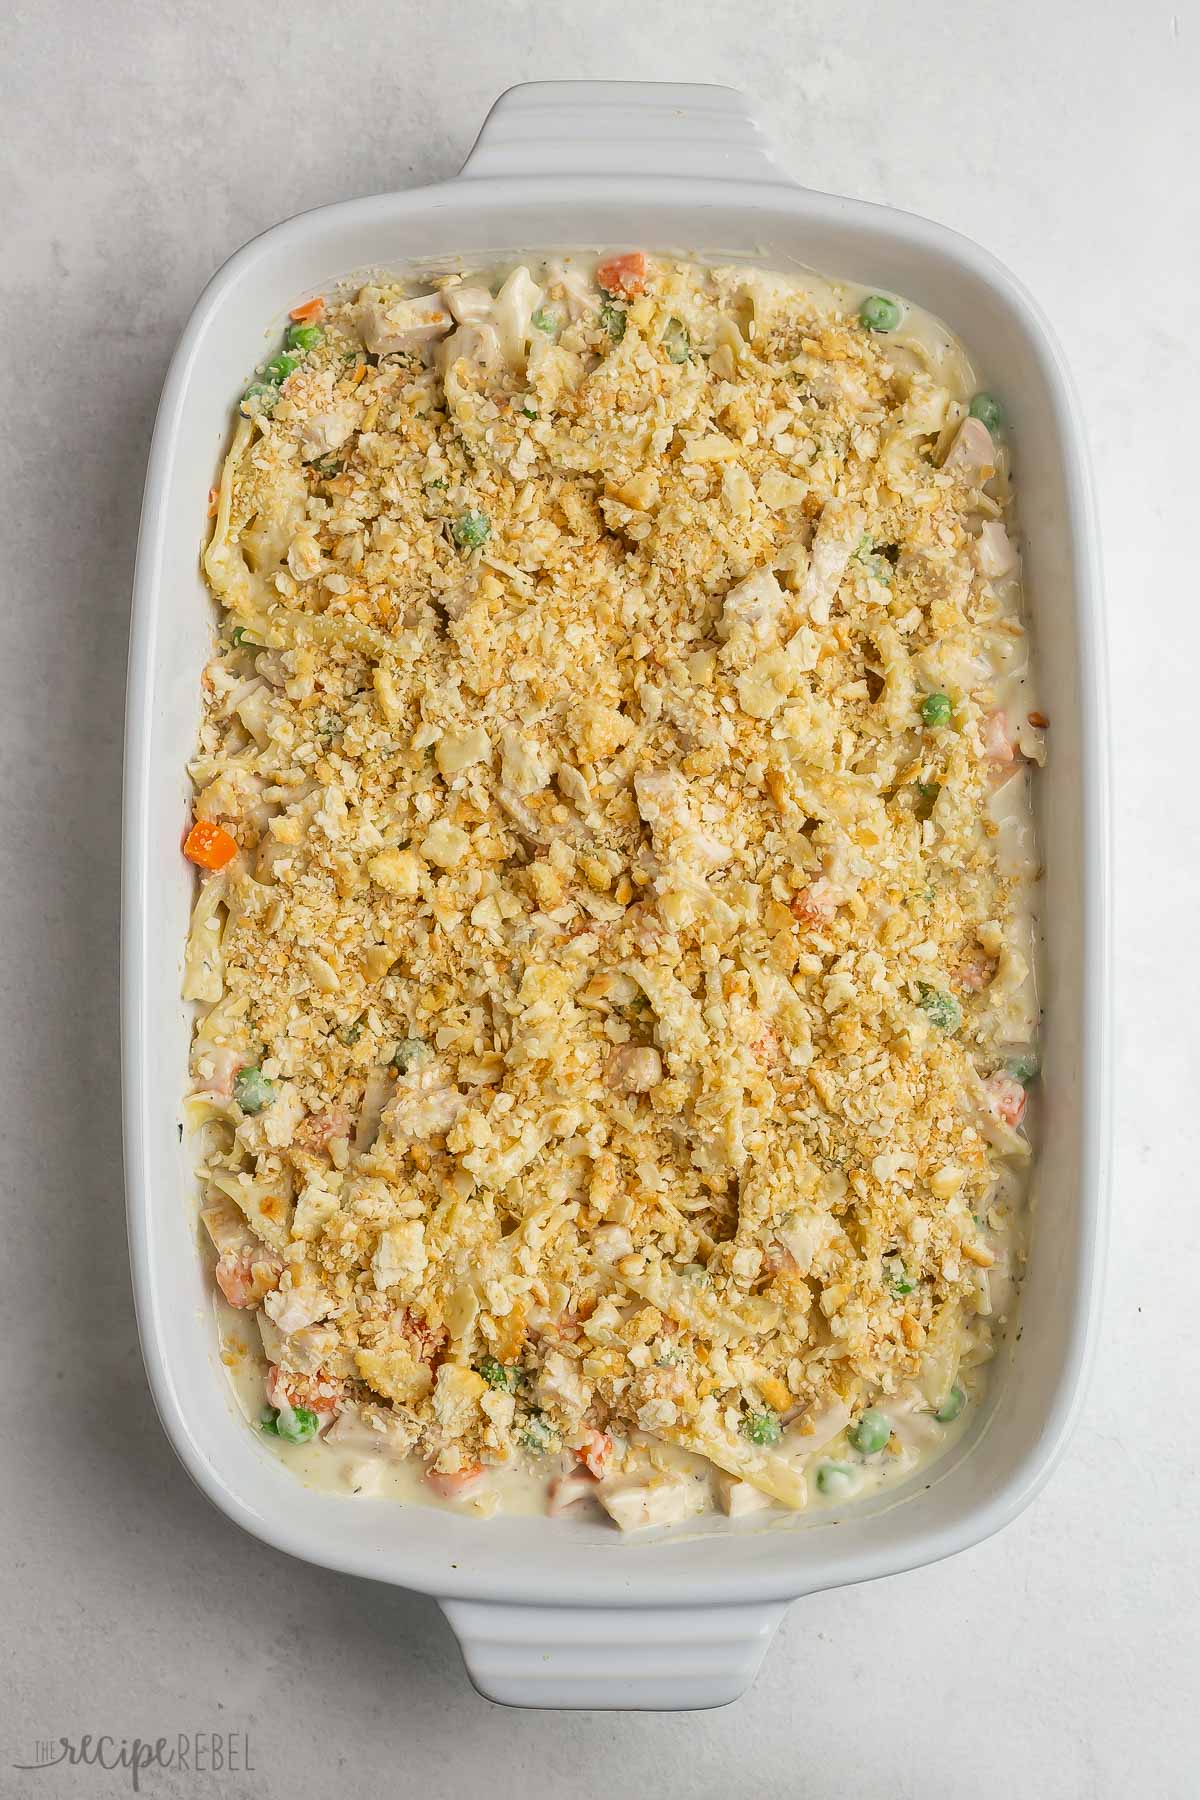 chicken noodle casserole ready to bake.